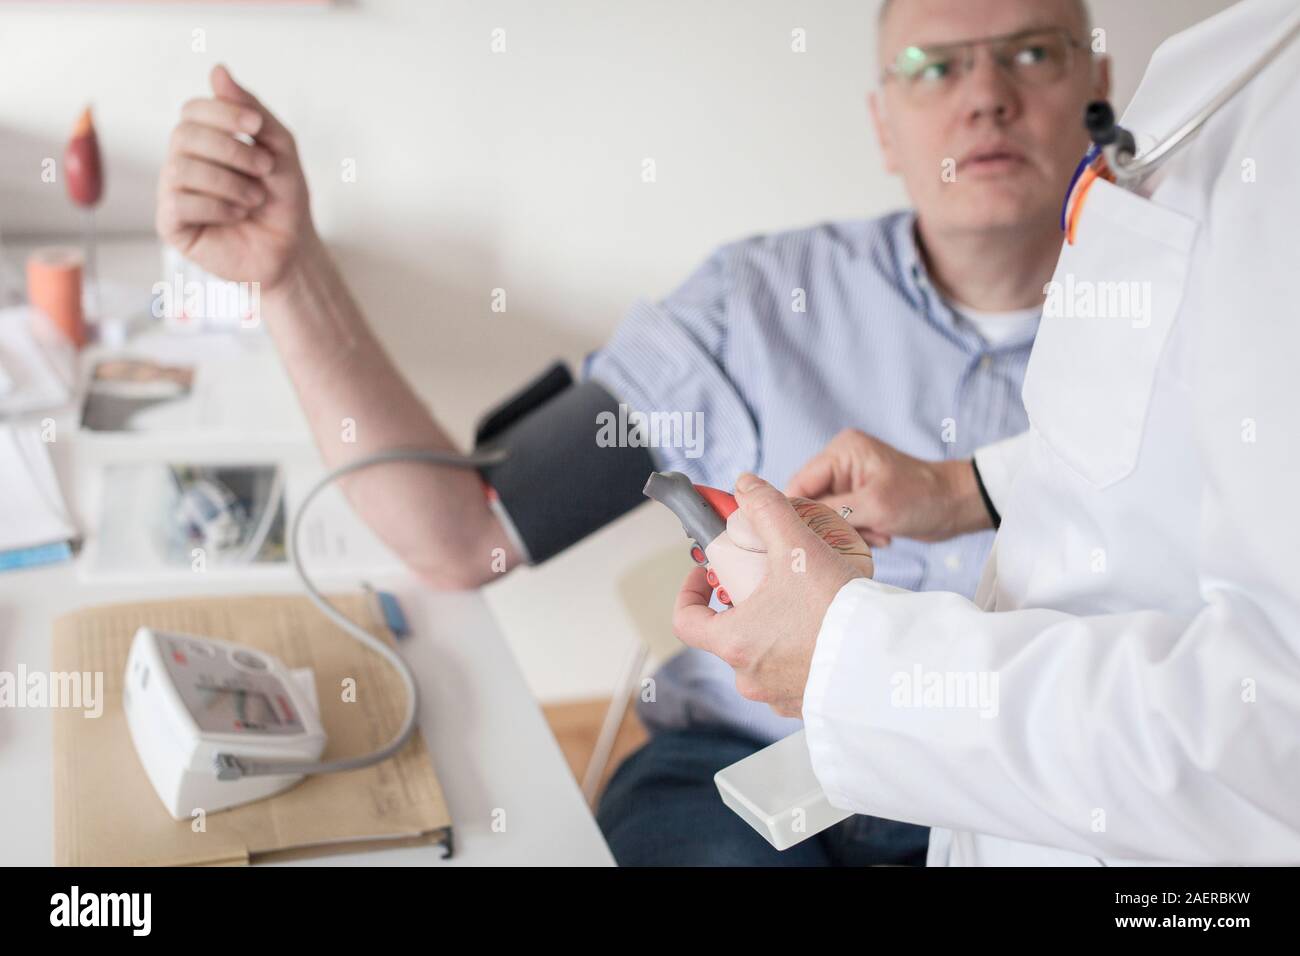 Cardiology consultation.Doctor briefs middle-aged patient on model of human heart Stock Photo